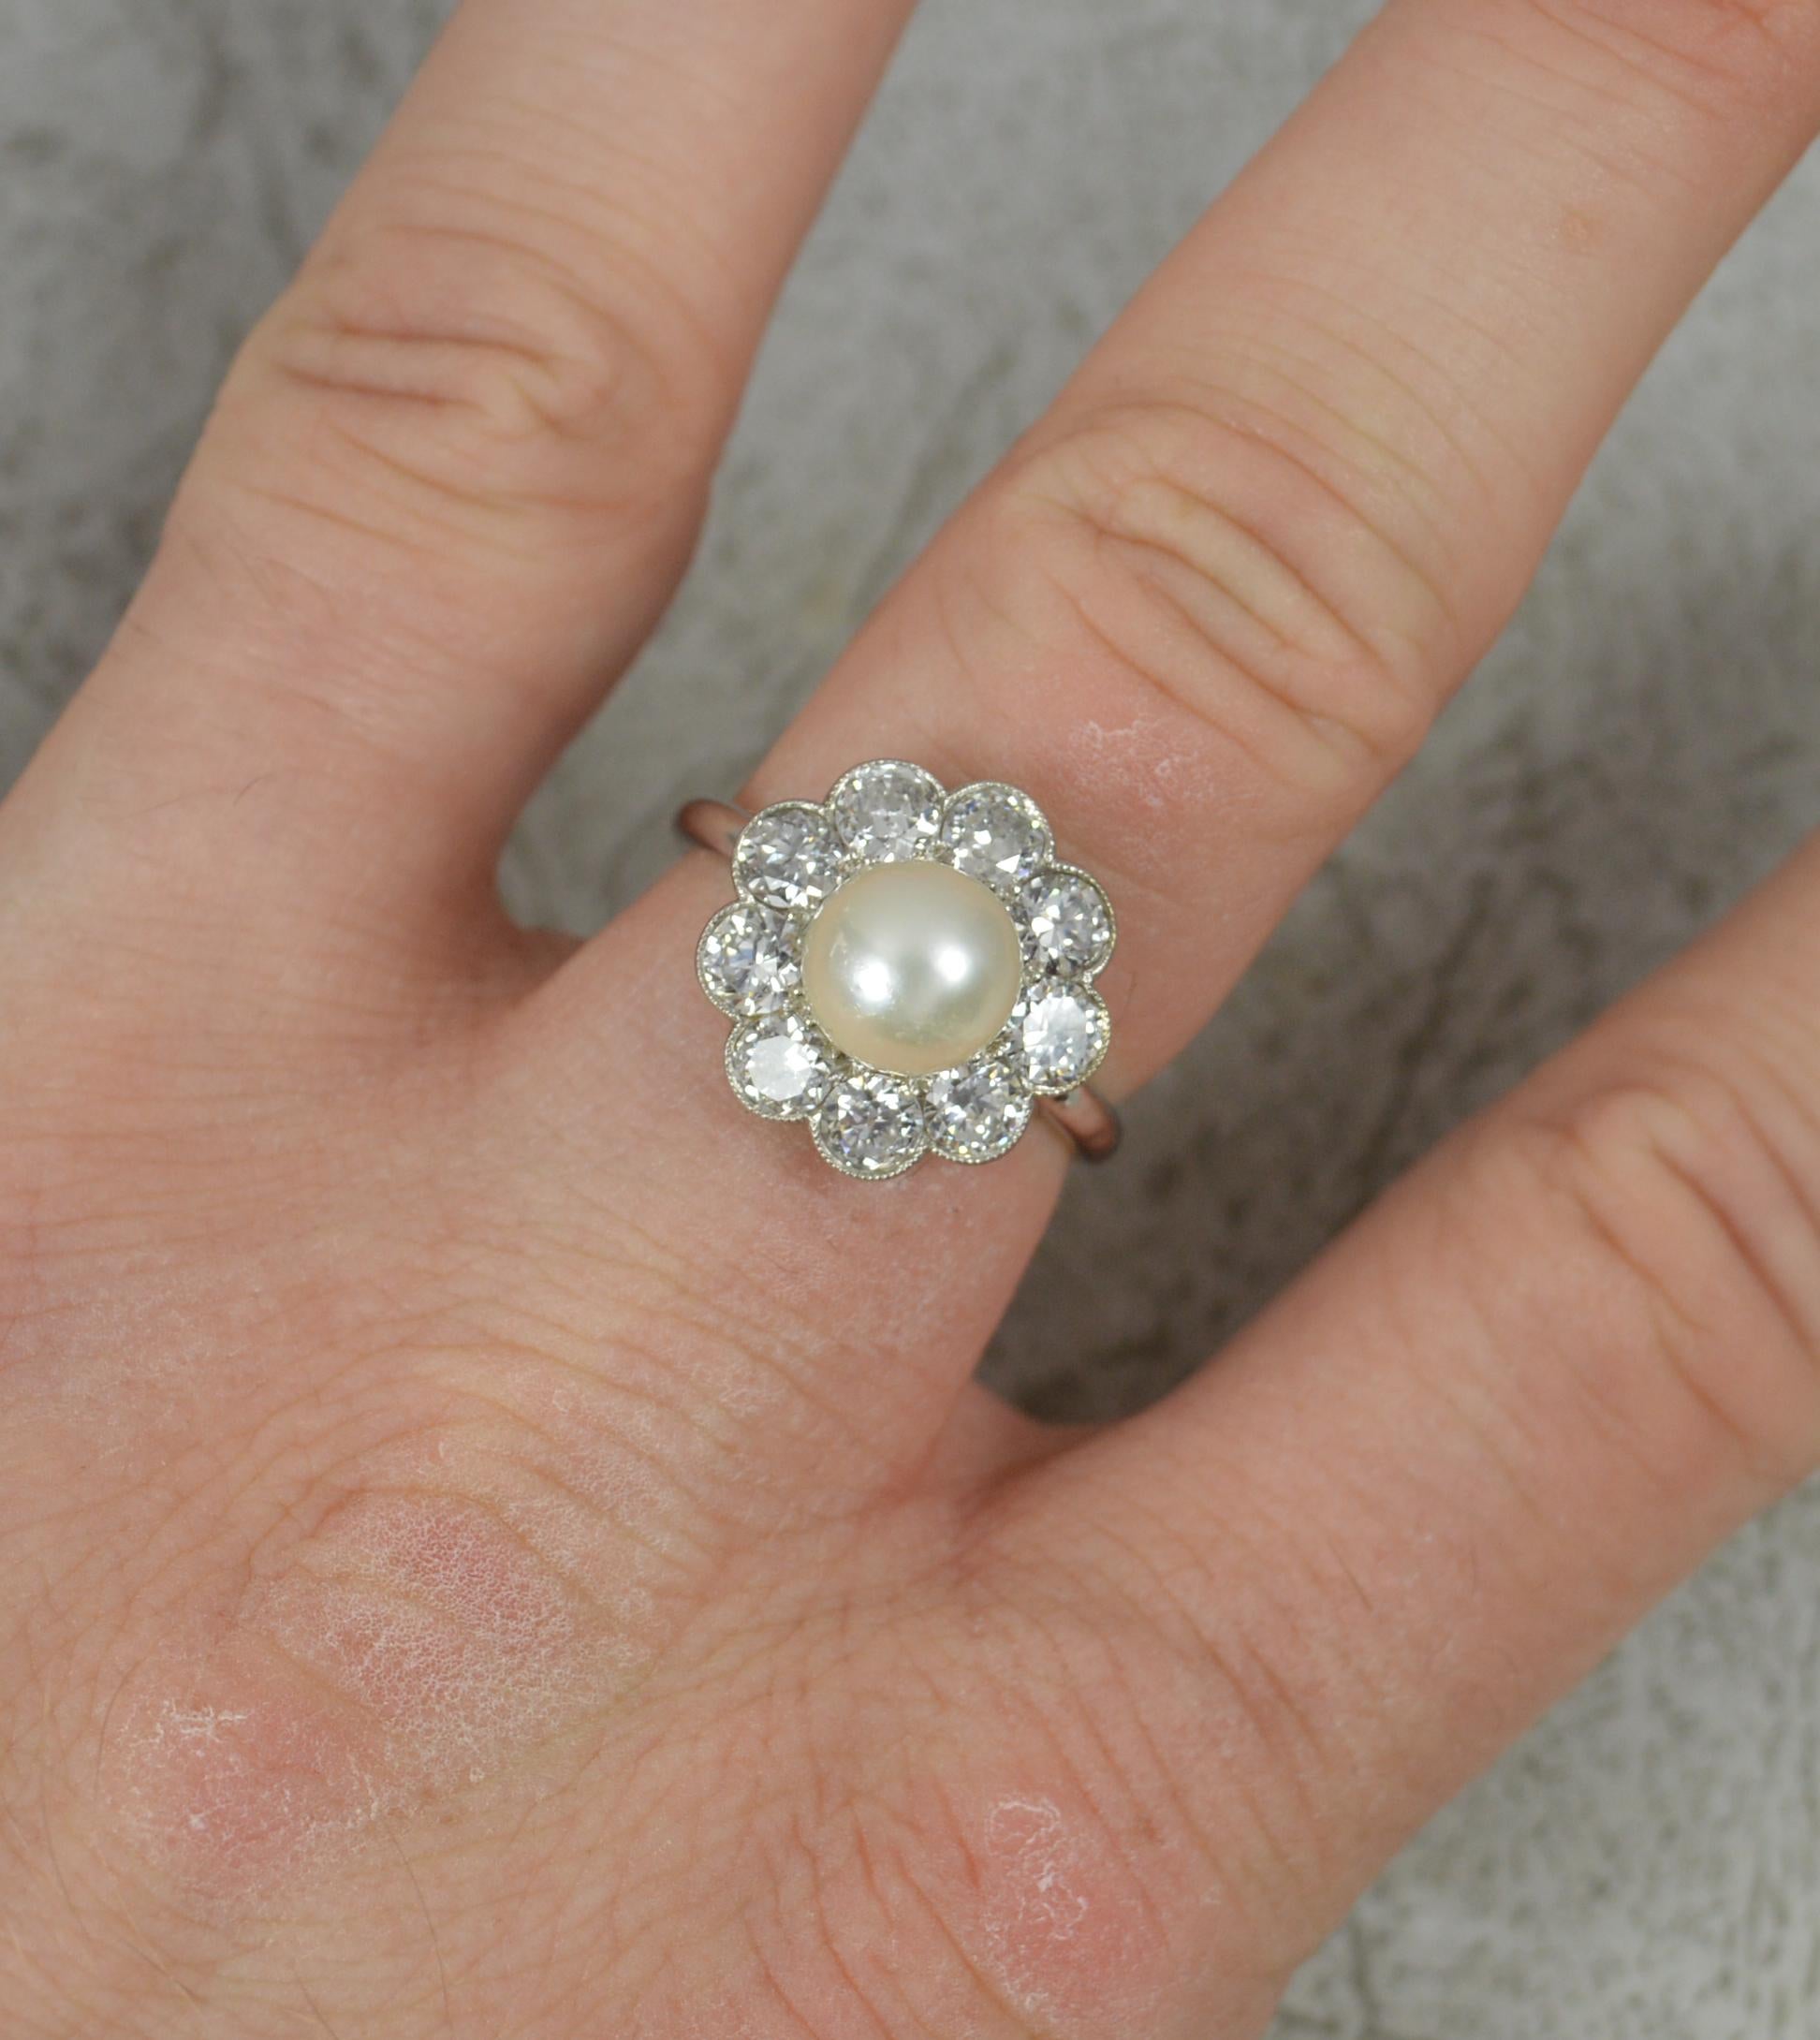 A stunning, true Edwardian period ring.
Solid platinum shank and setting.
Designed with a pearl to the centre, 7mm diameter. Surrounding are nine natural, old cut diamonds, set into full grain bezel settings. Approx 2.00 carat total weight, clean